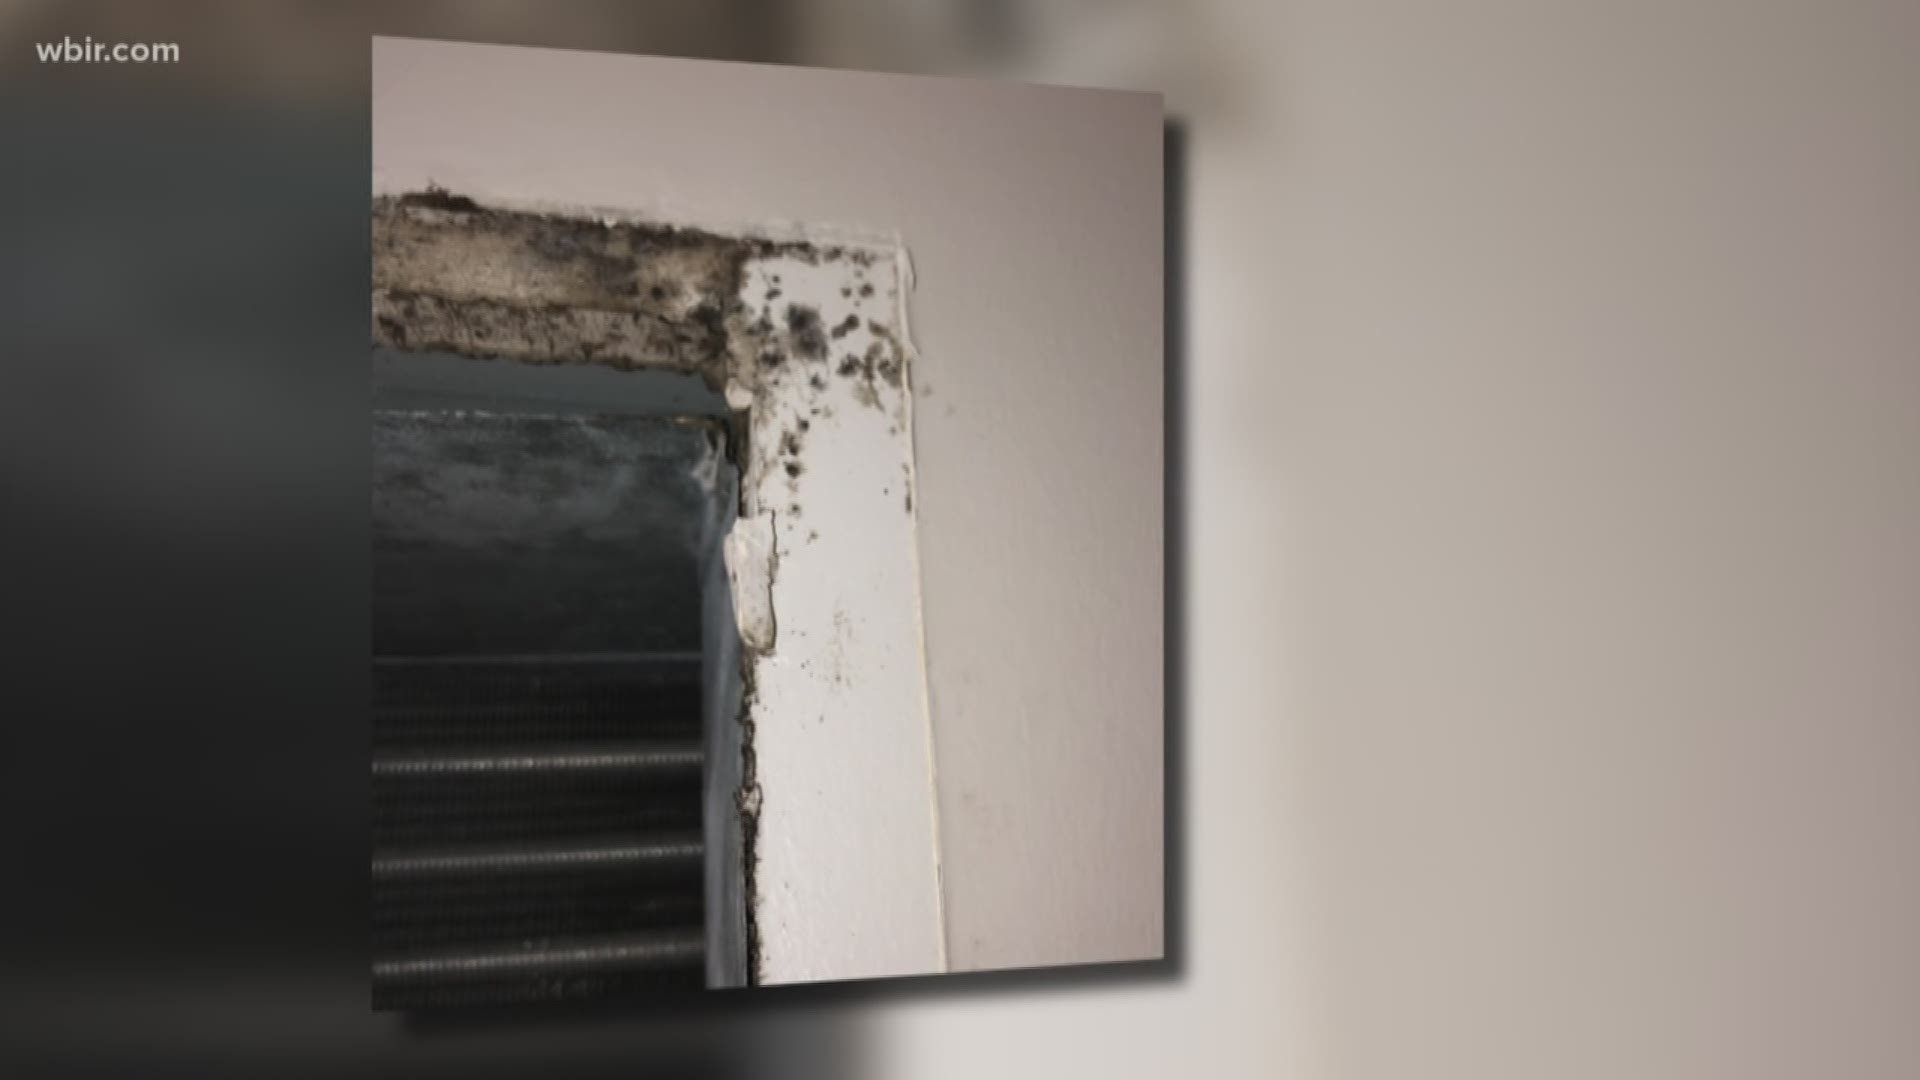 The university has been dealing with mold issues in several dorms, though only Laurel Hall was bad enough to move students out.